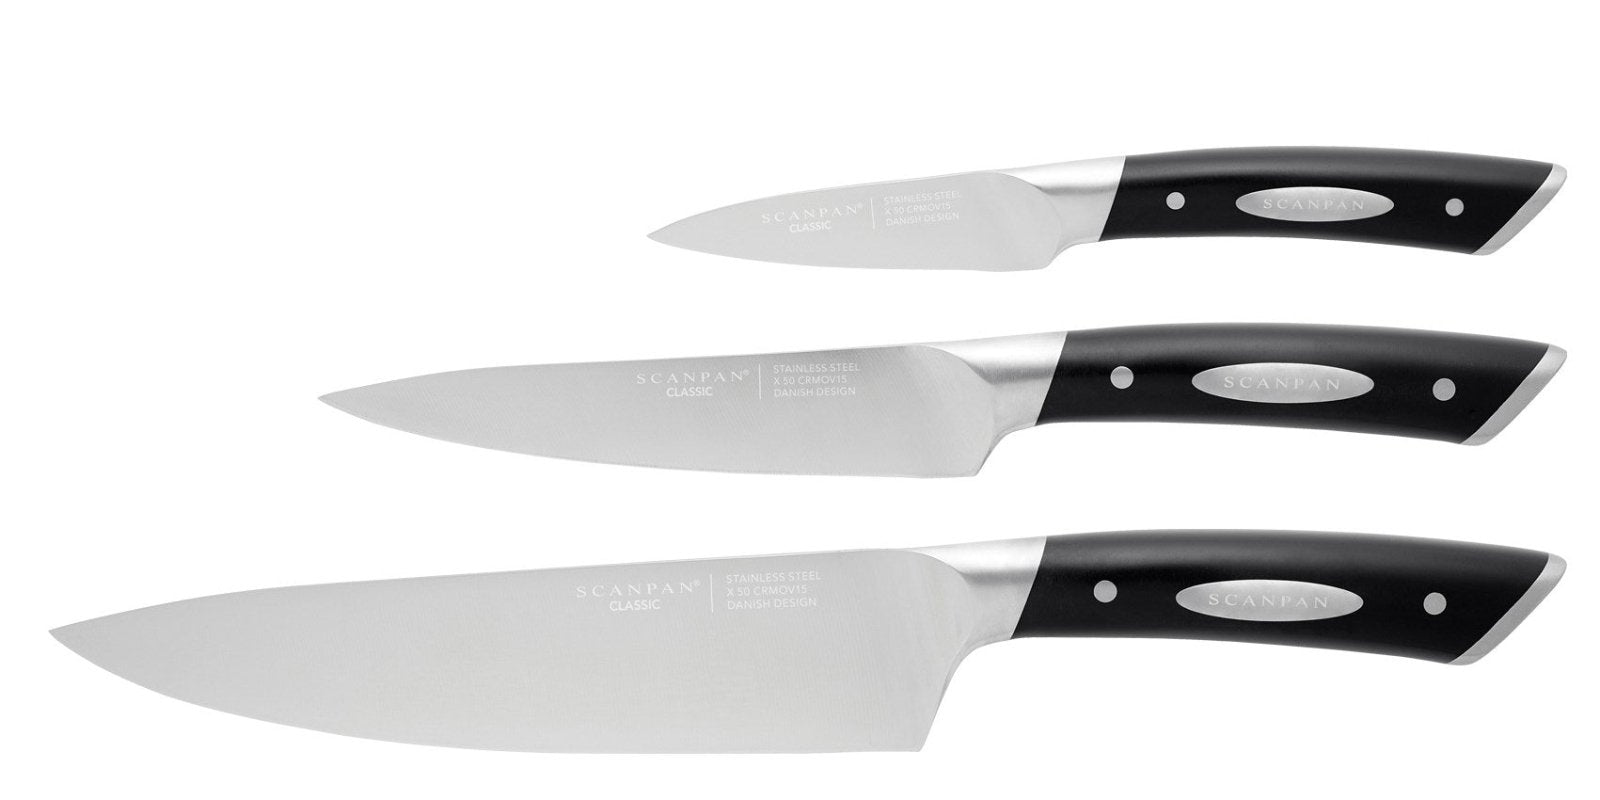 Scanpan Classic 3 Piece Starter Set - SP92001800 - The Cotswold Knife Company